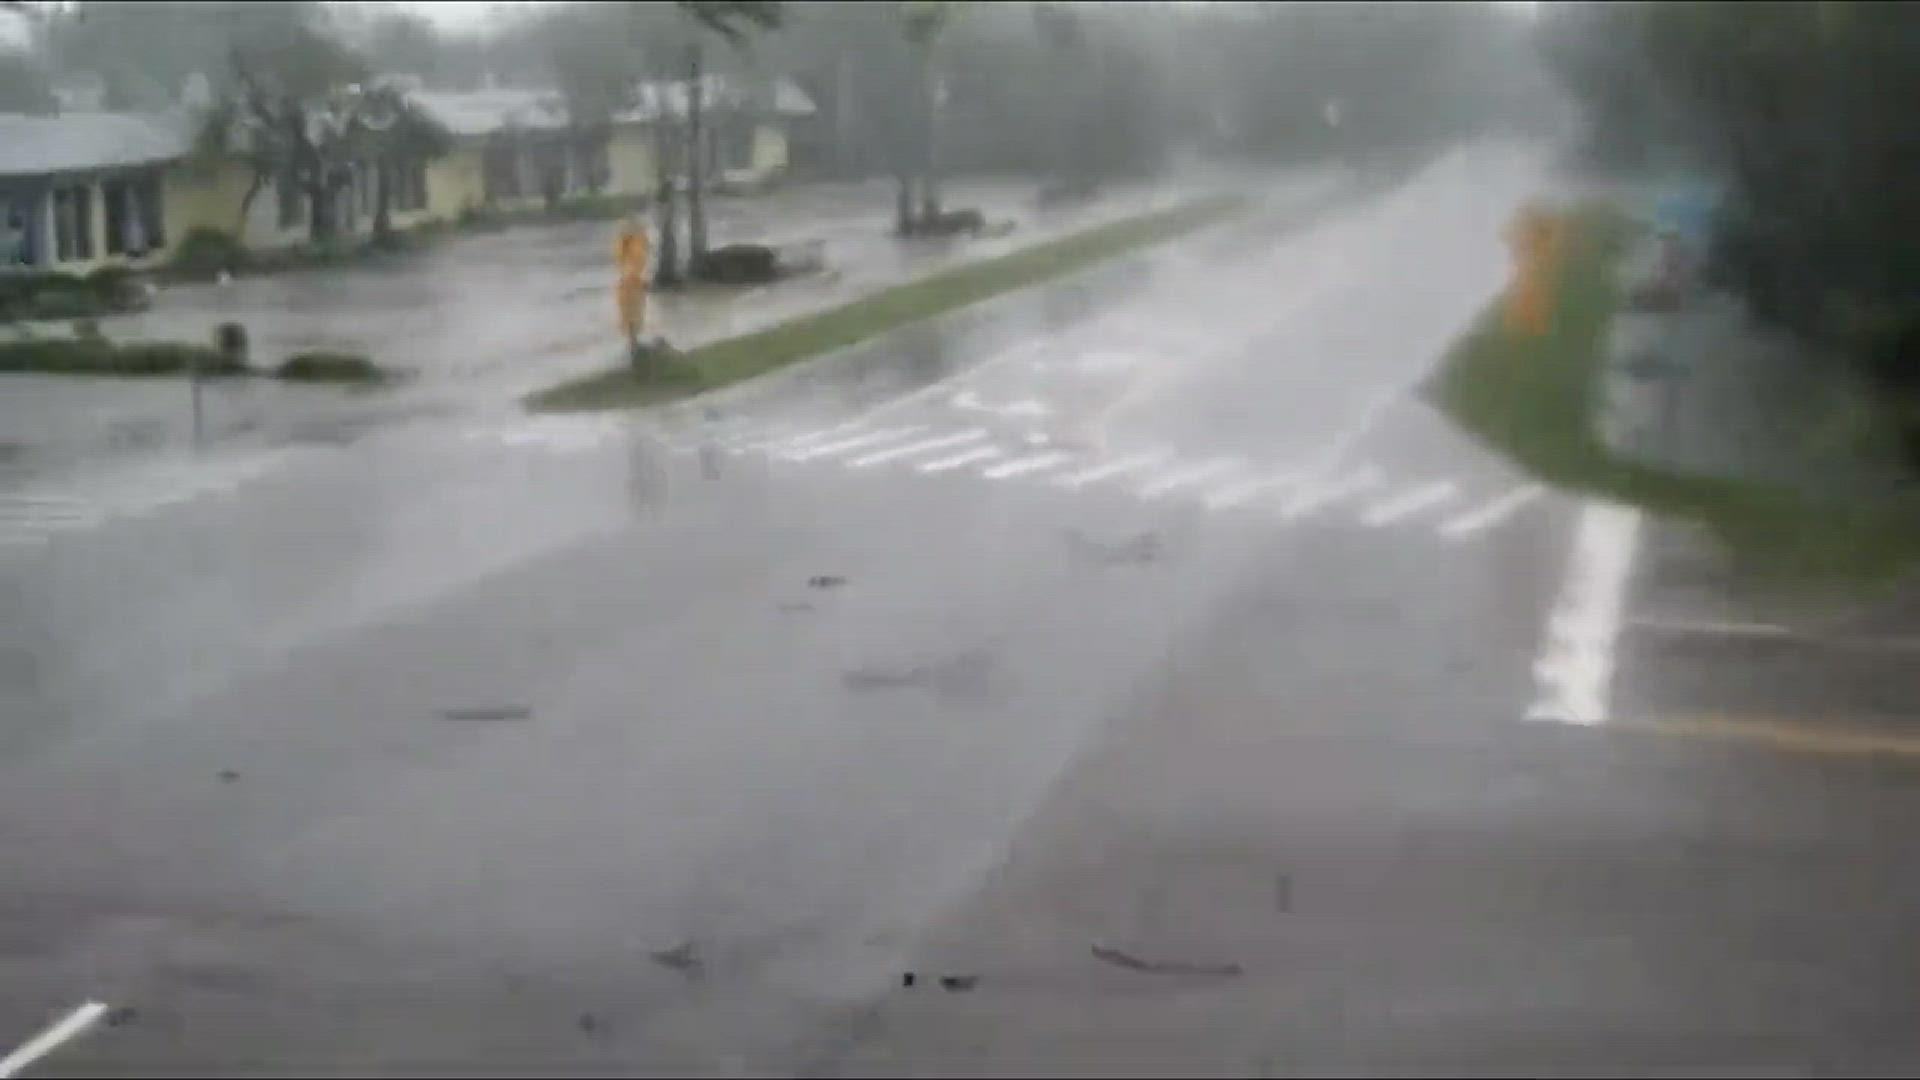 A traffic camera from the city of Sanibel shows a storm surge developing. Courtesy: @BirdingPeepWx via City of Sanibel